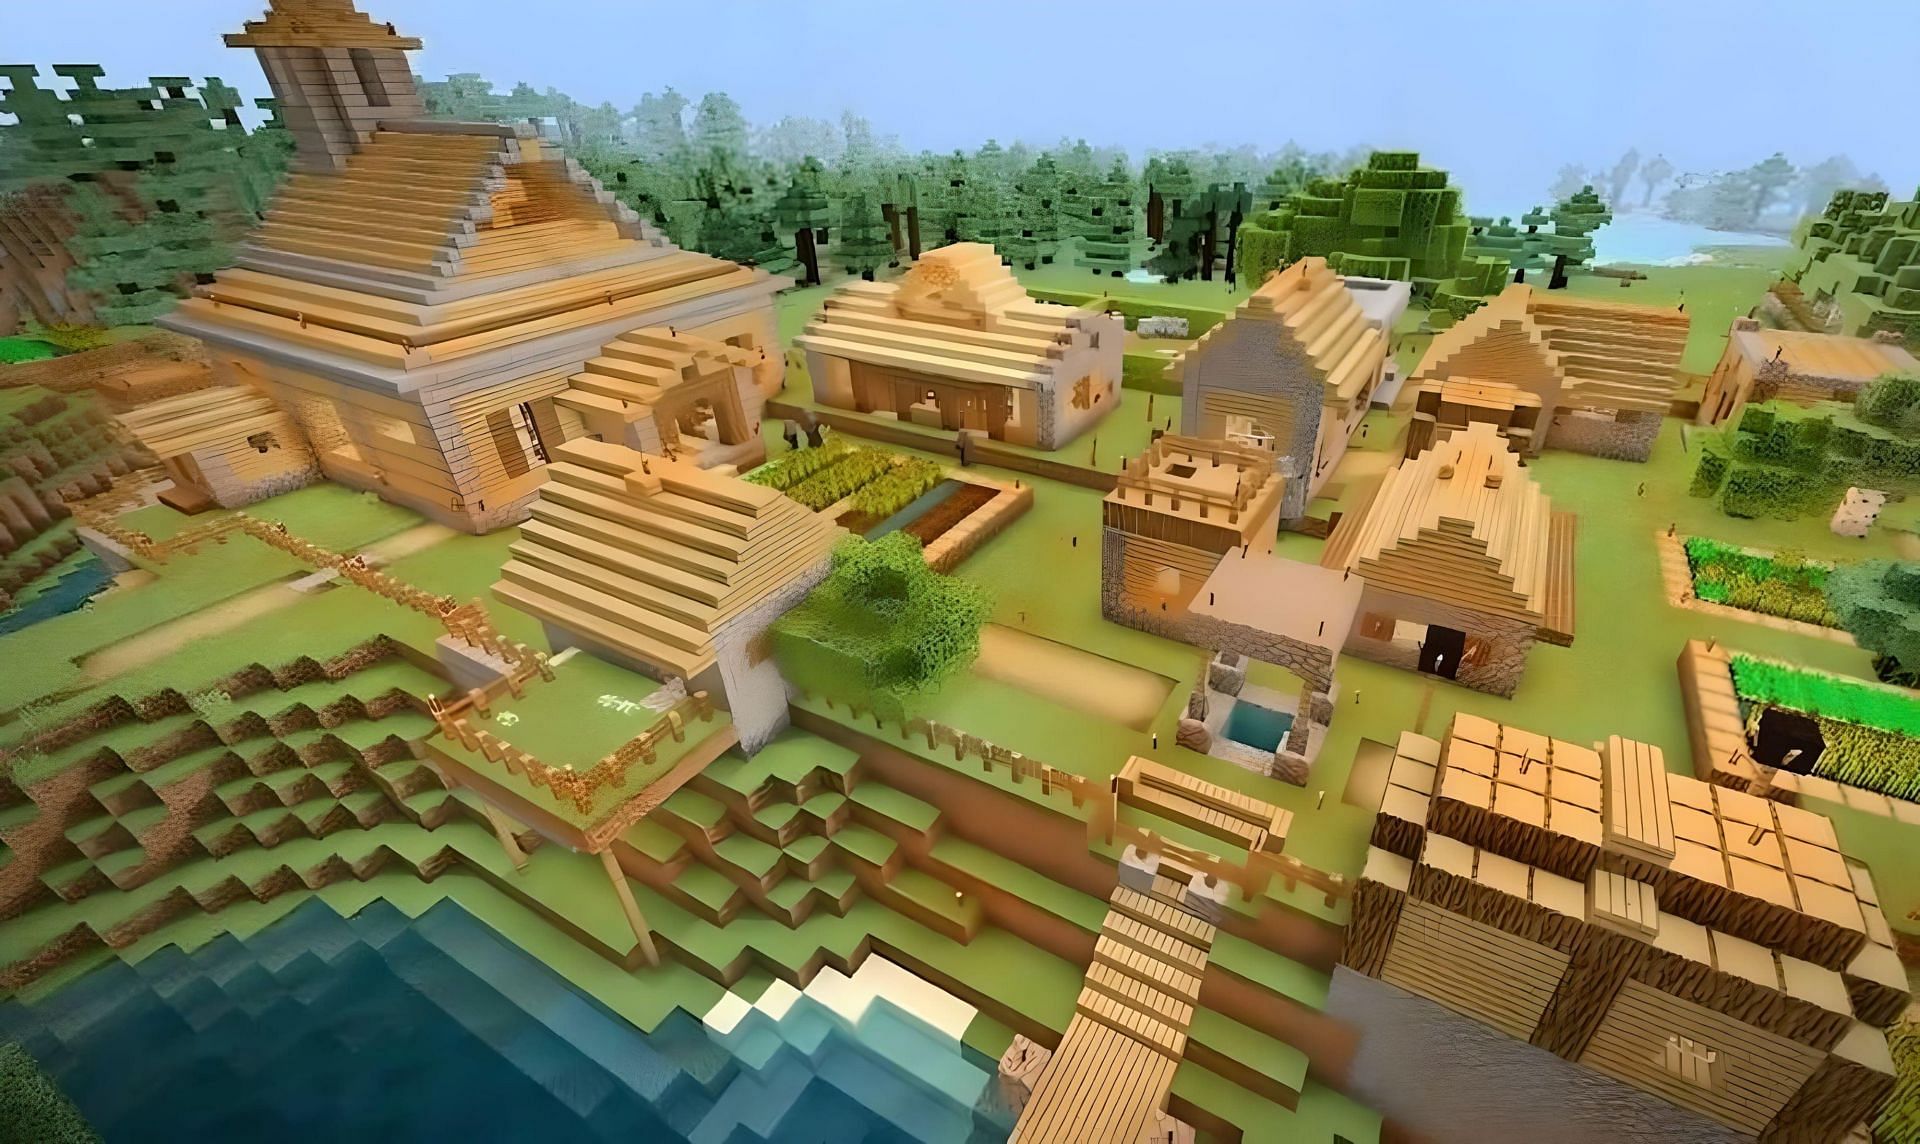 Villages in Minecraft are filled with awesome resources that can be used by players (Image via Mojang))